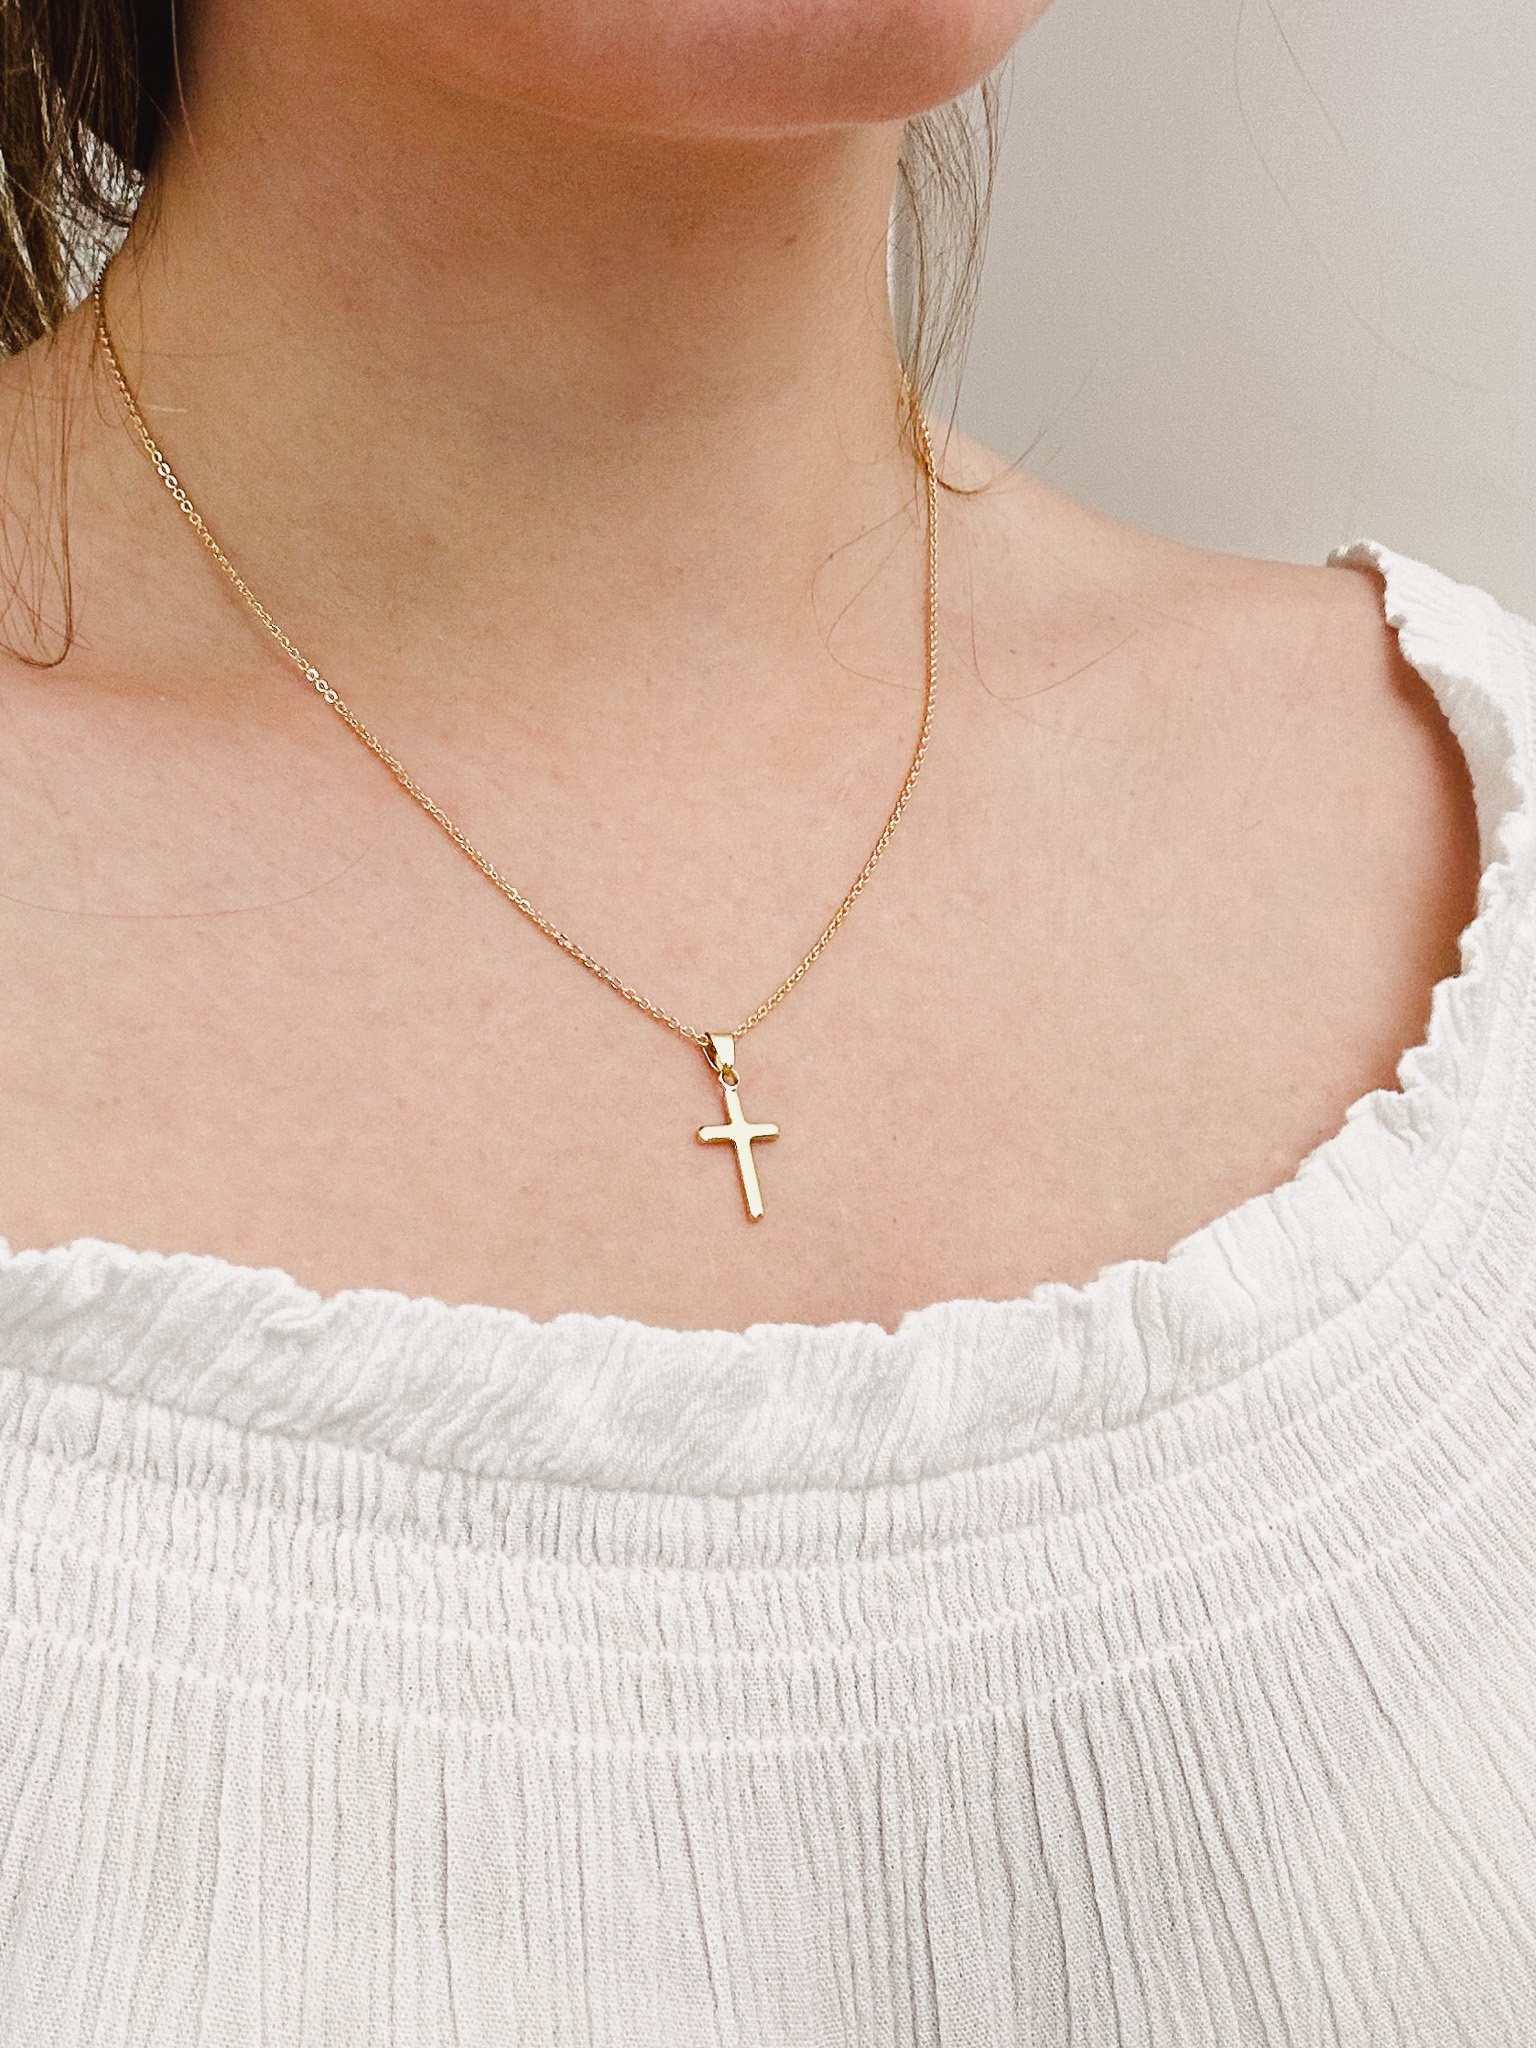 Dainty Cross Necklace - Southern Trends